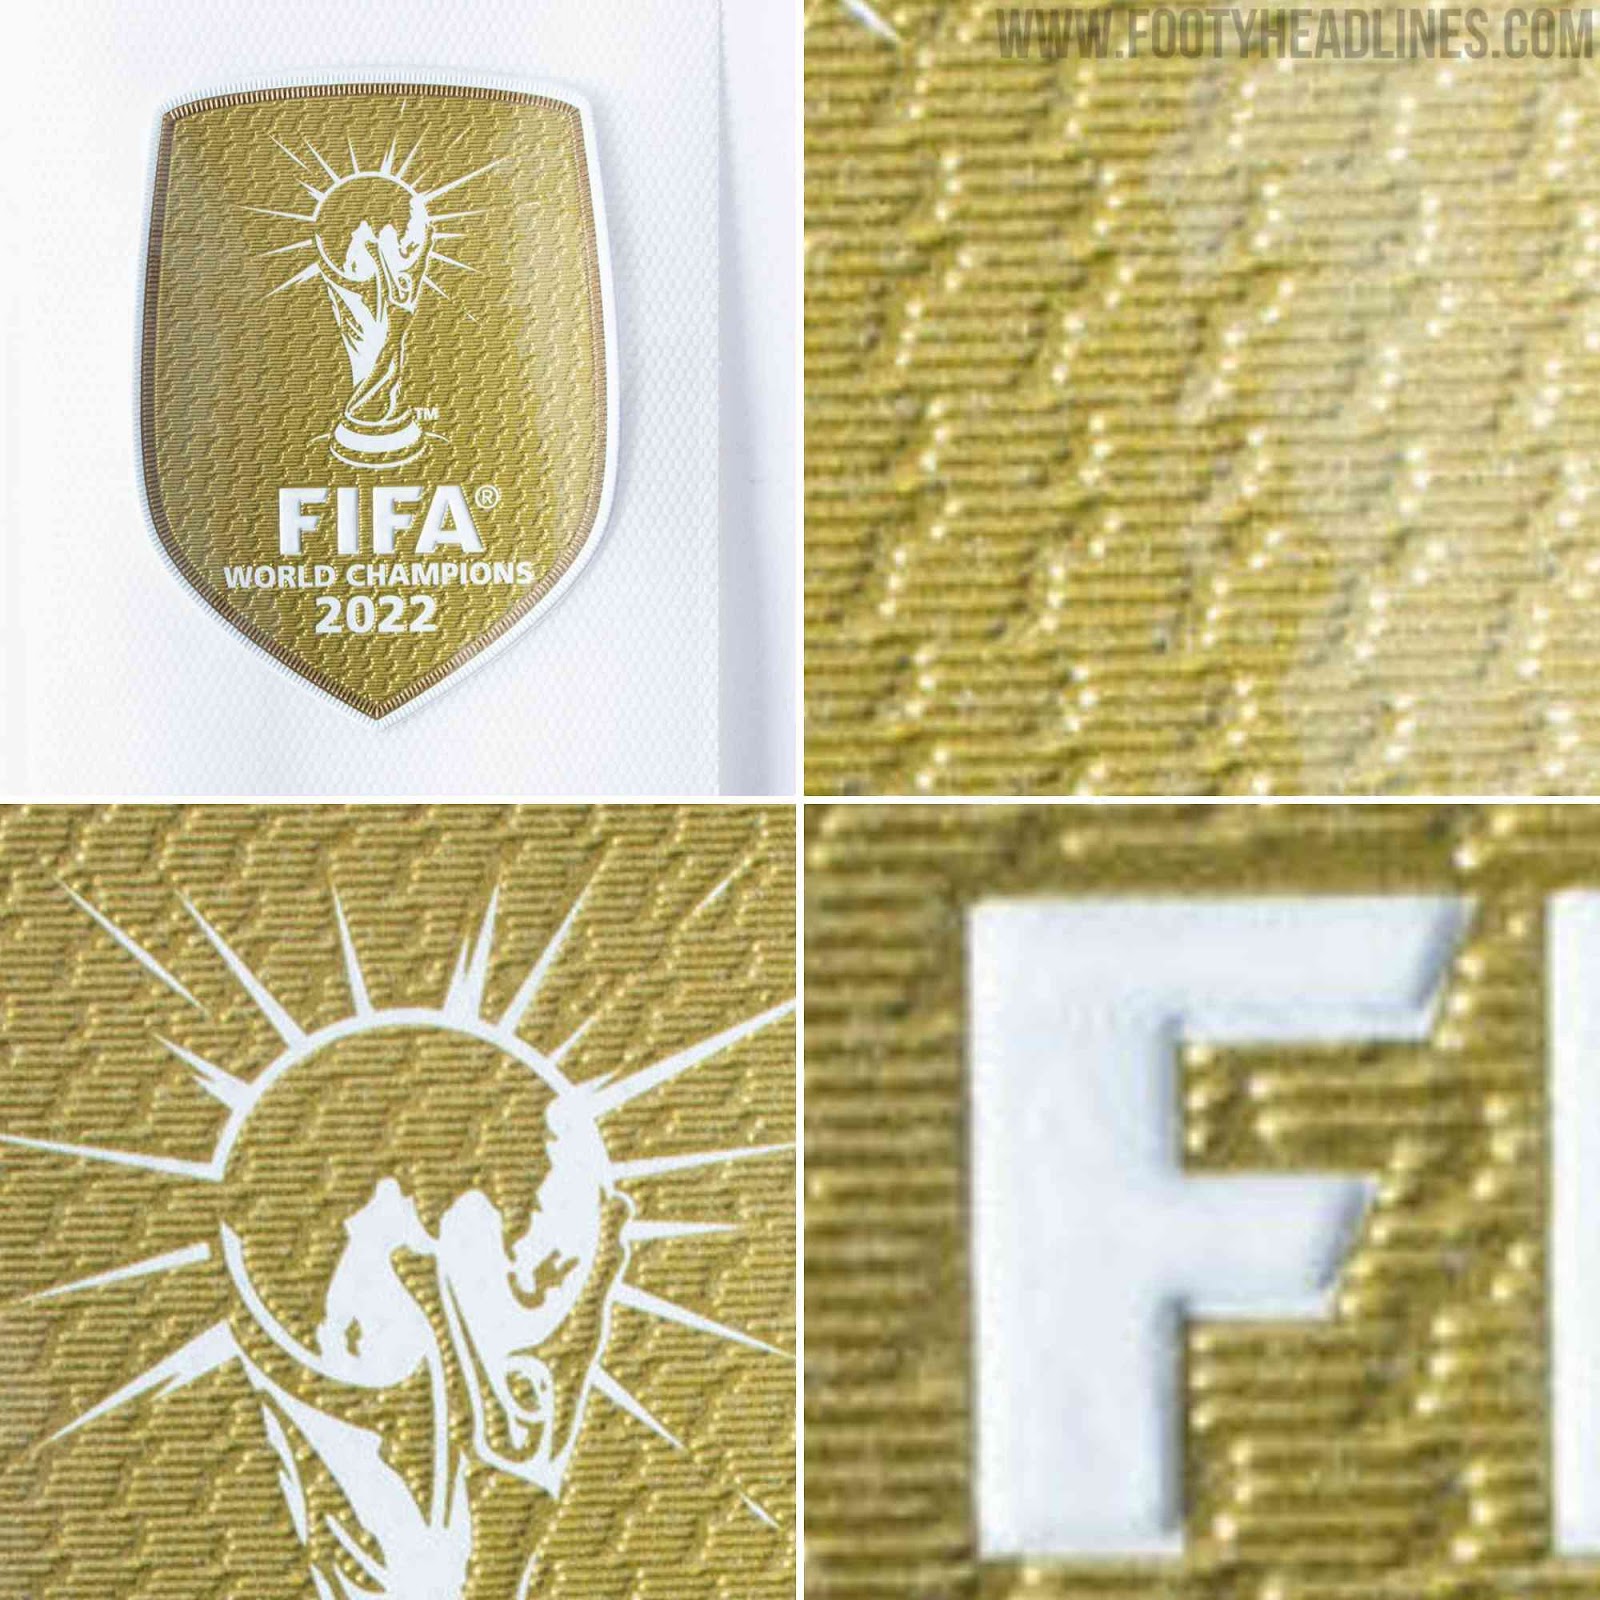 100% Official 2022 World Cup Winners Badge & Match Insignia Finally  Available - Footy Headlines